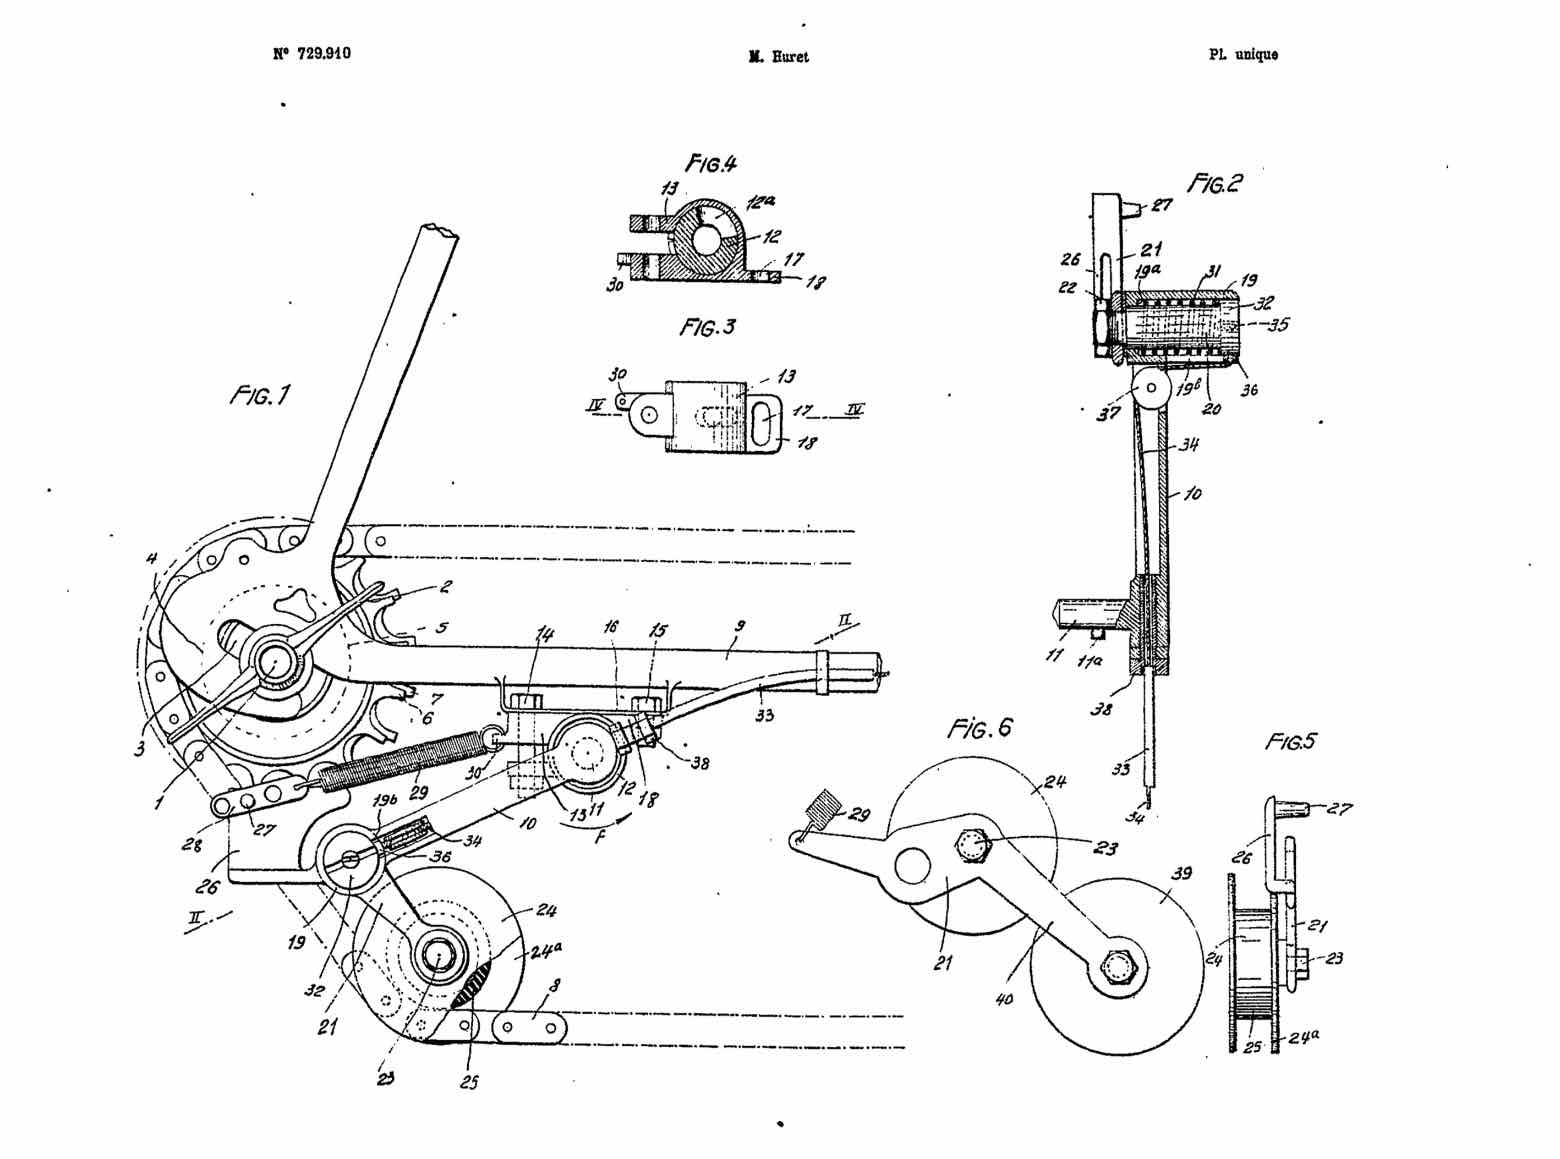 French Patent 729,910 - Huret scan 4 main image